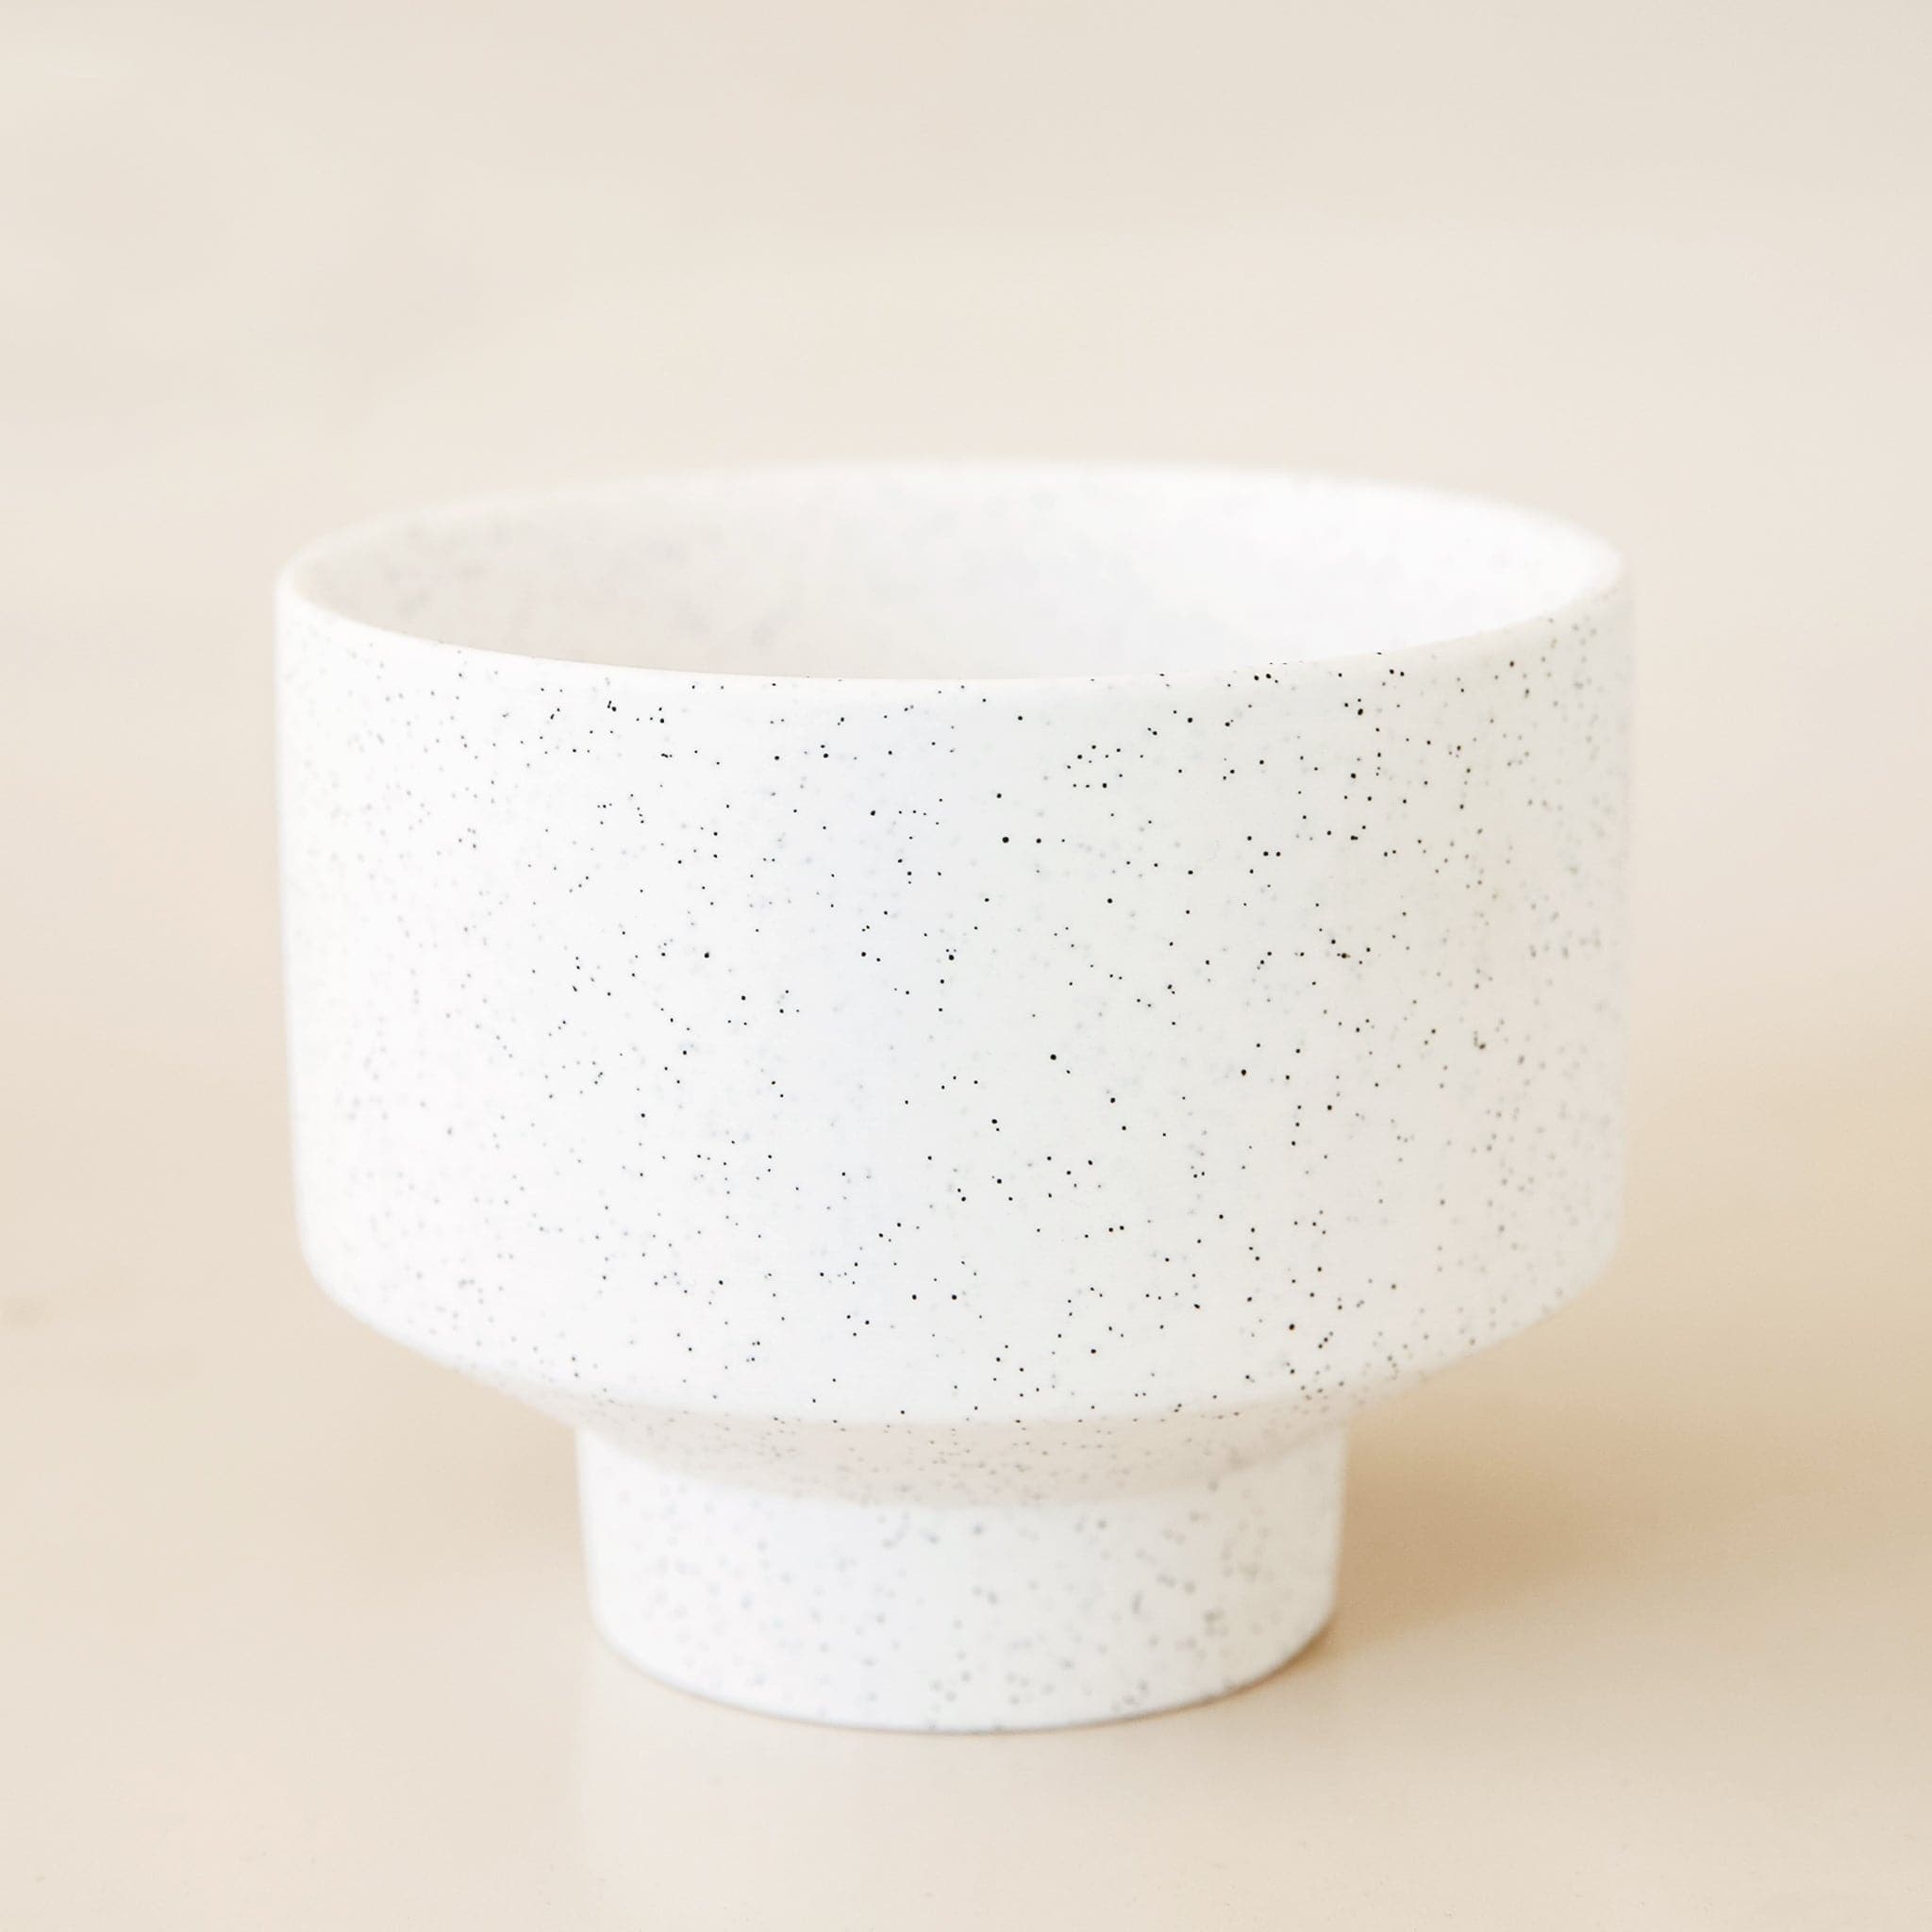 White cylinder pot that tapers into a smaller base. The pot is covered in black speckles.